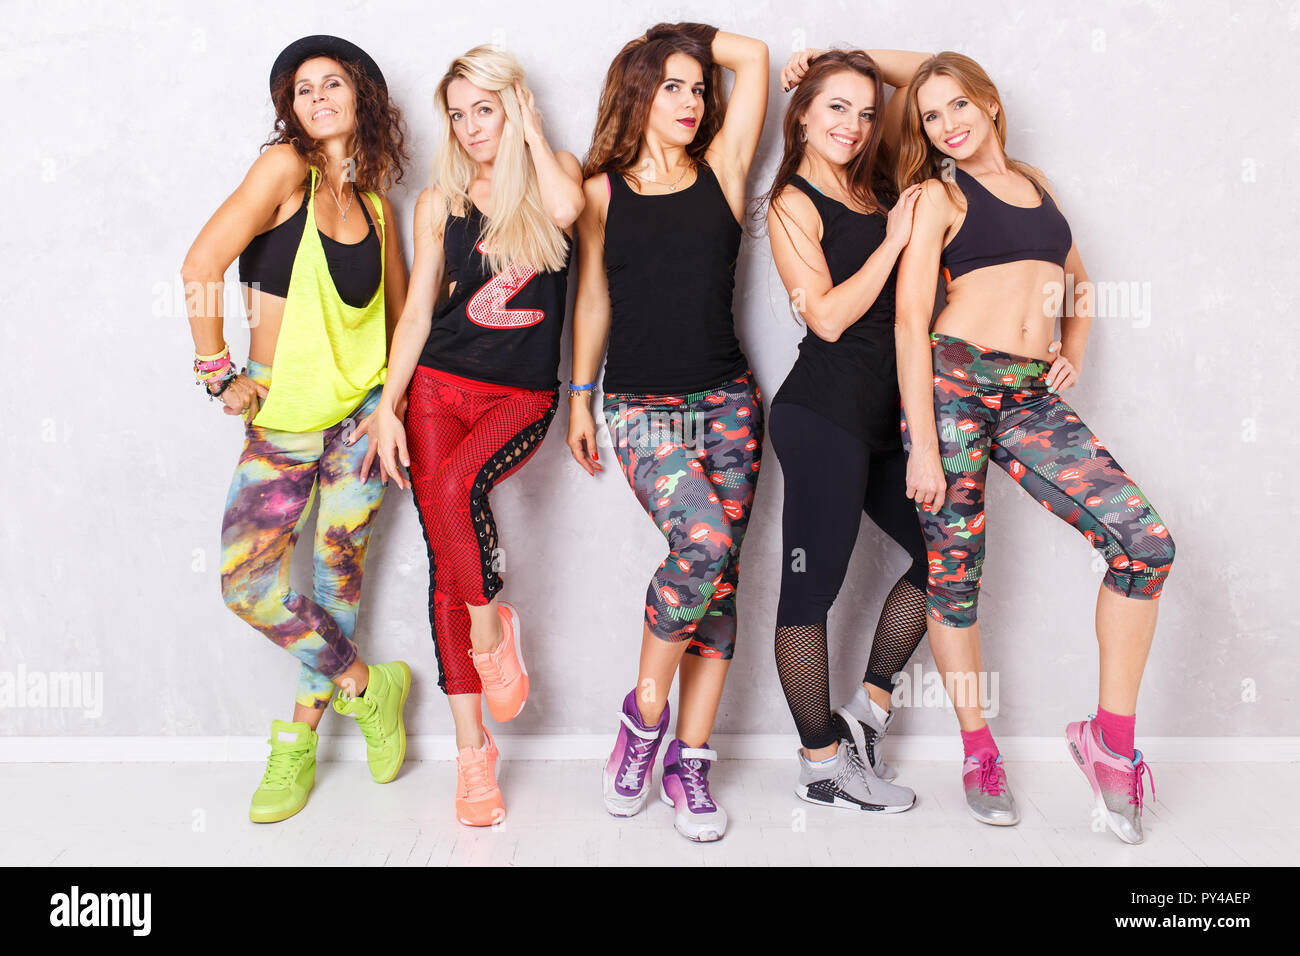 Group of smiling fitness girls having fun together. Aerobic dance fitness group concept background Stock Photo